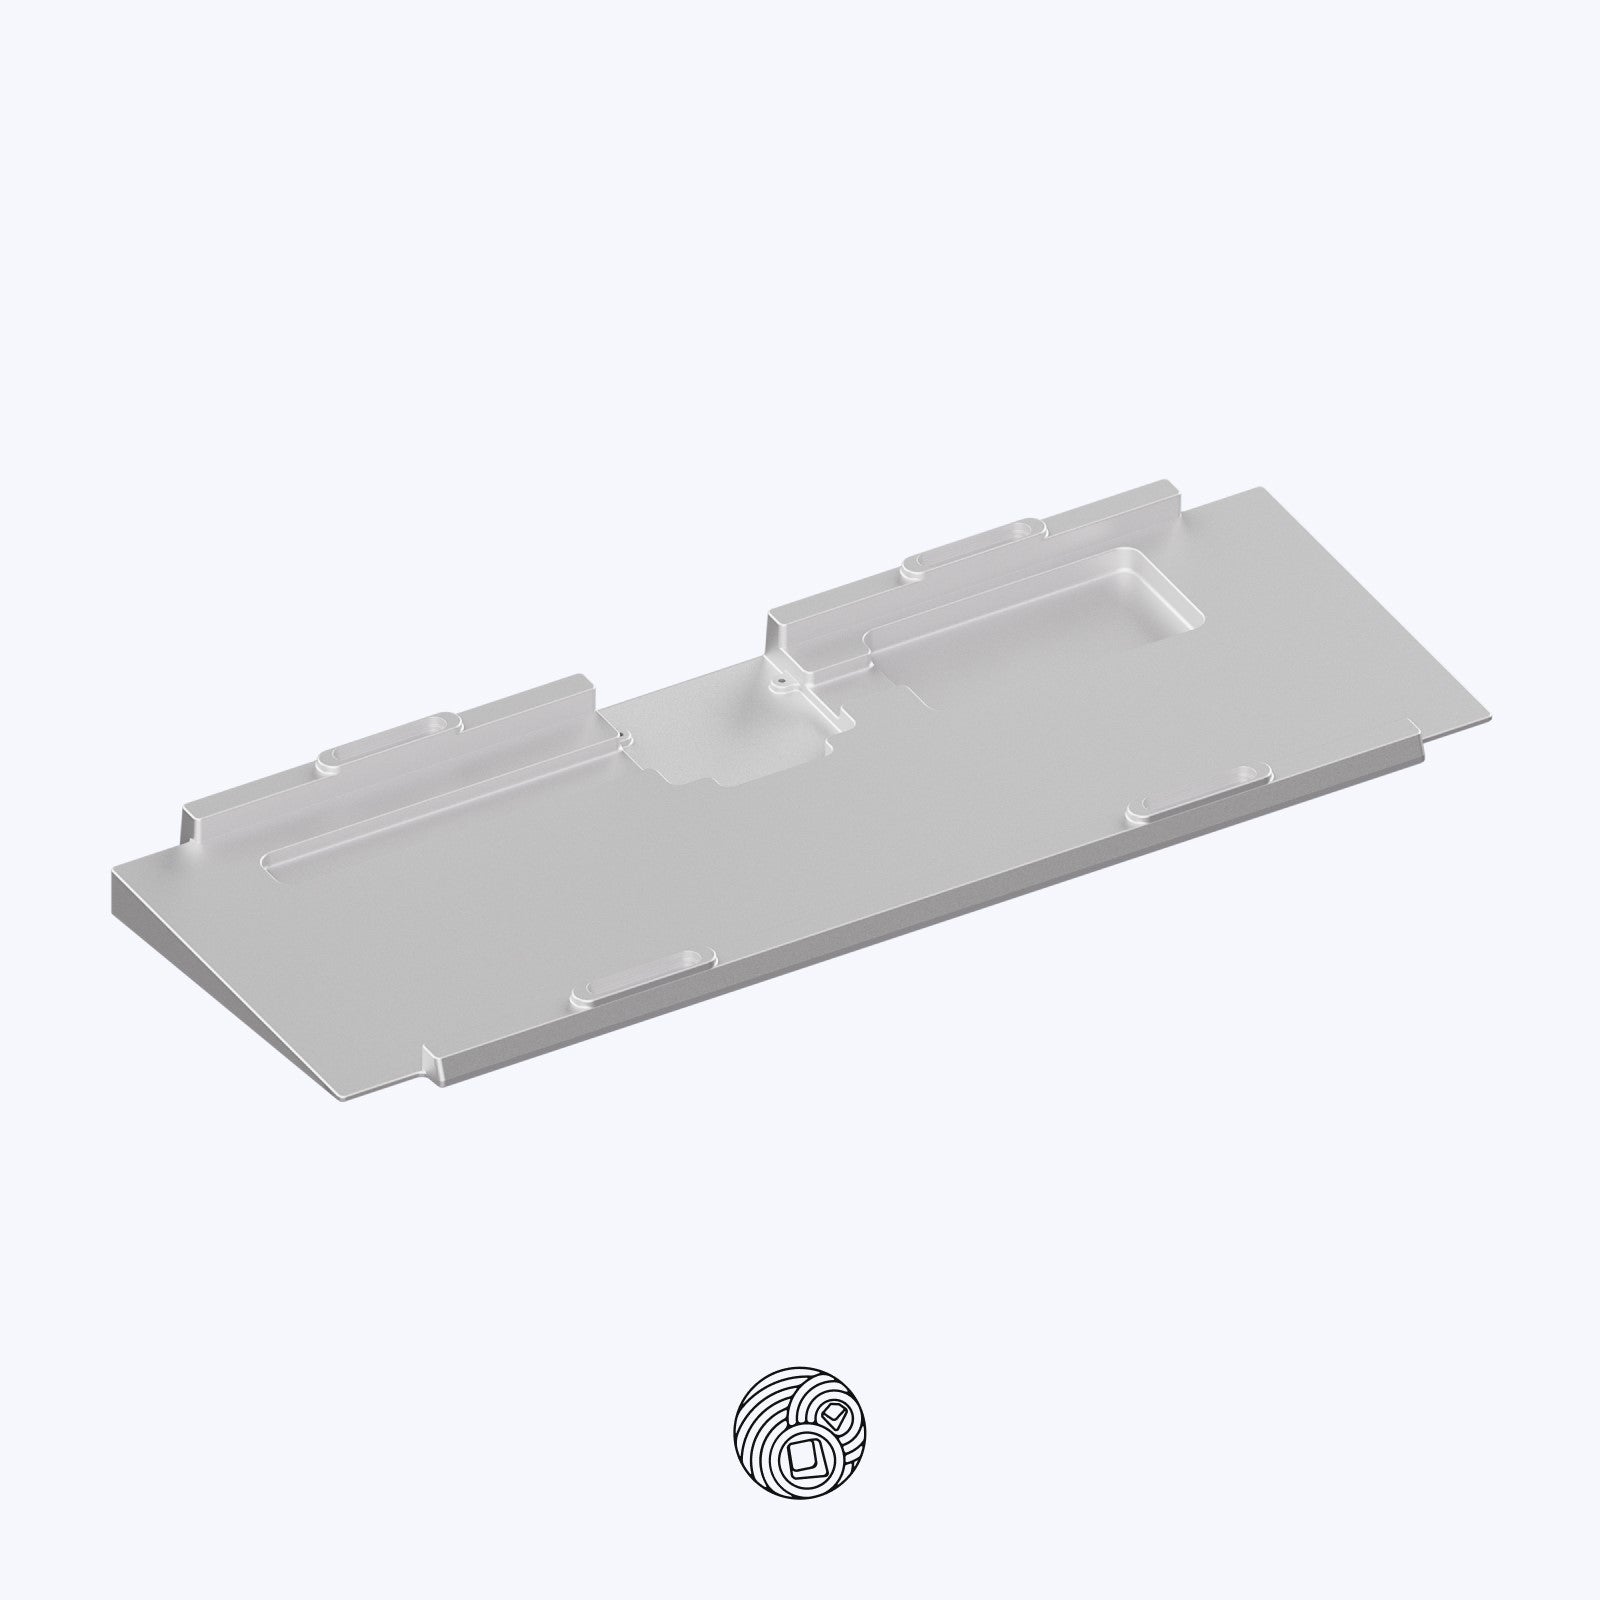 Kei v2 by MONOKEI Add-on Parts for 60% - Pre-Order